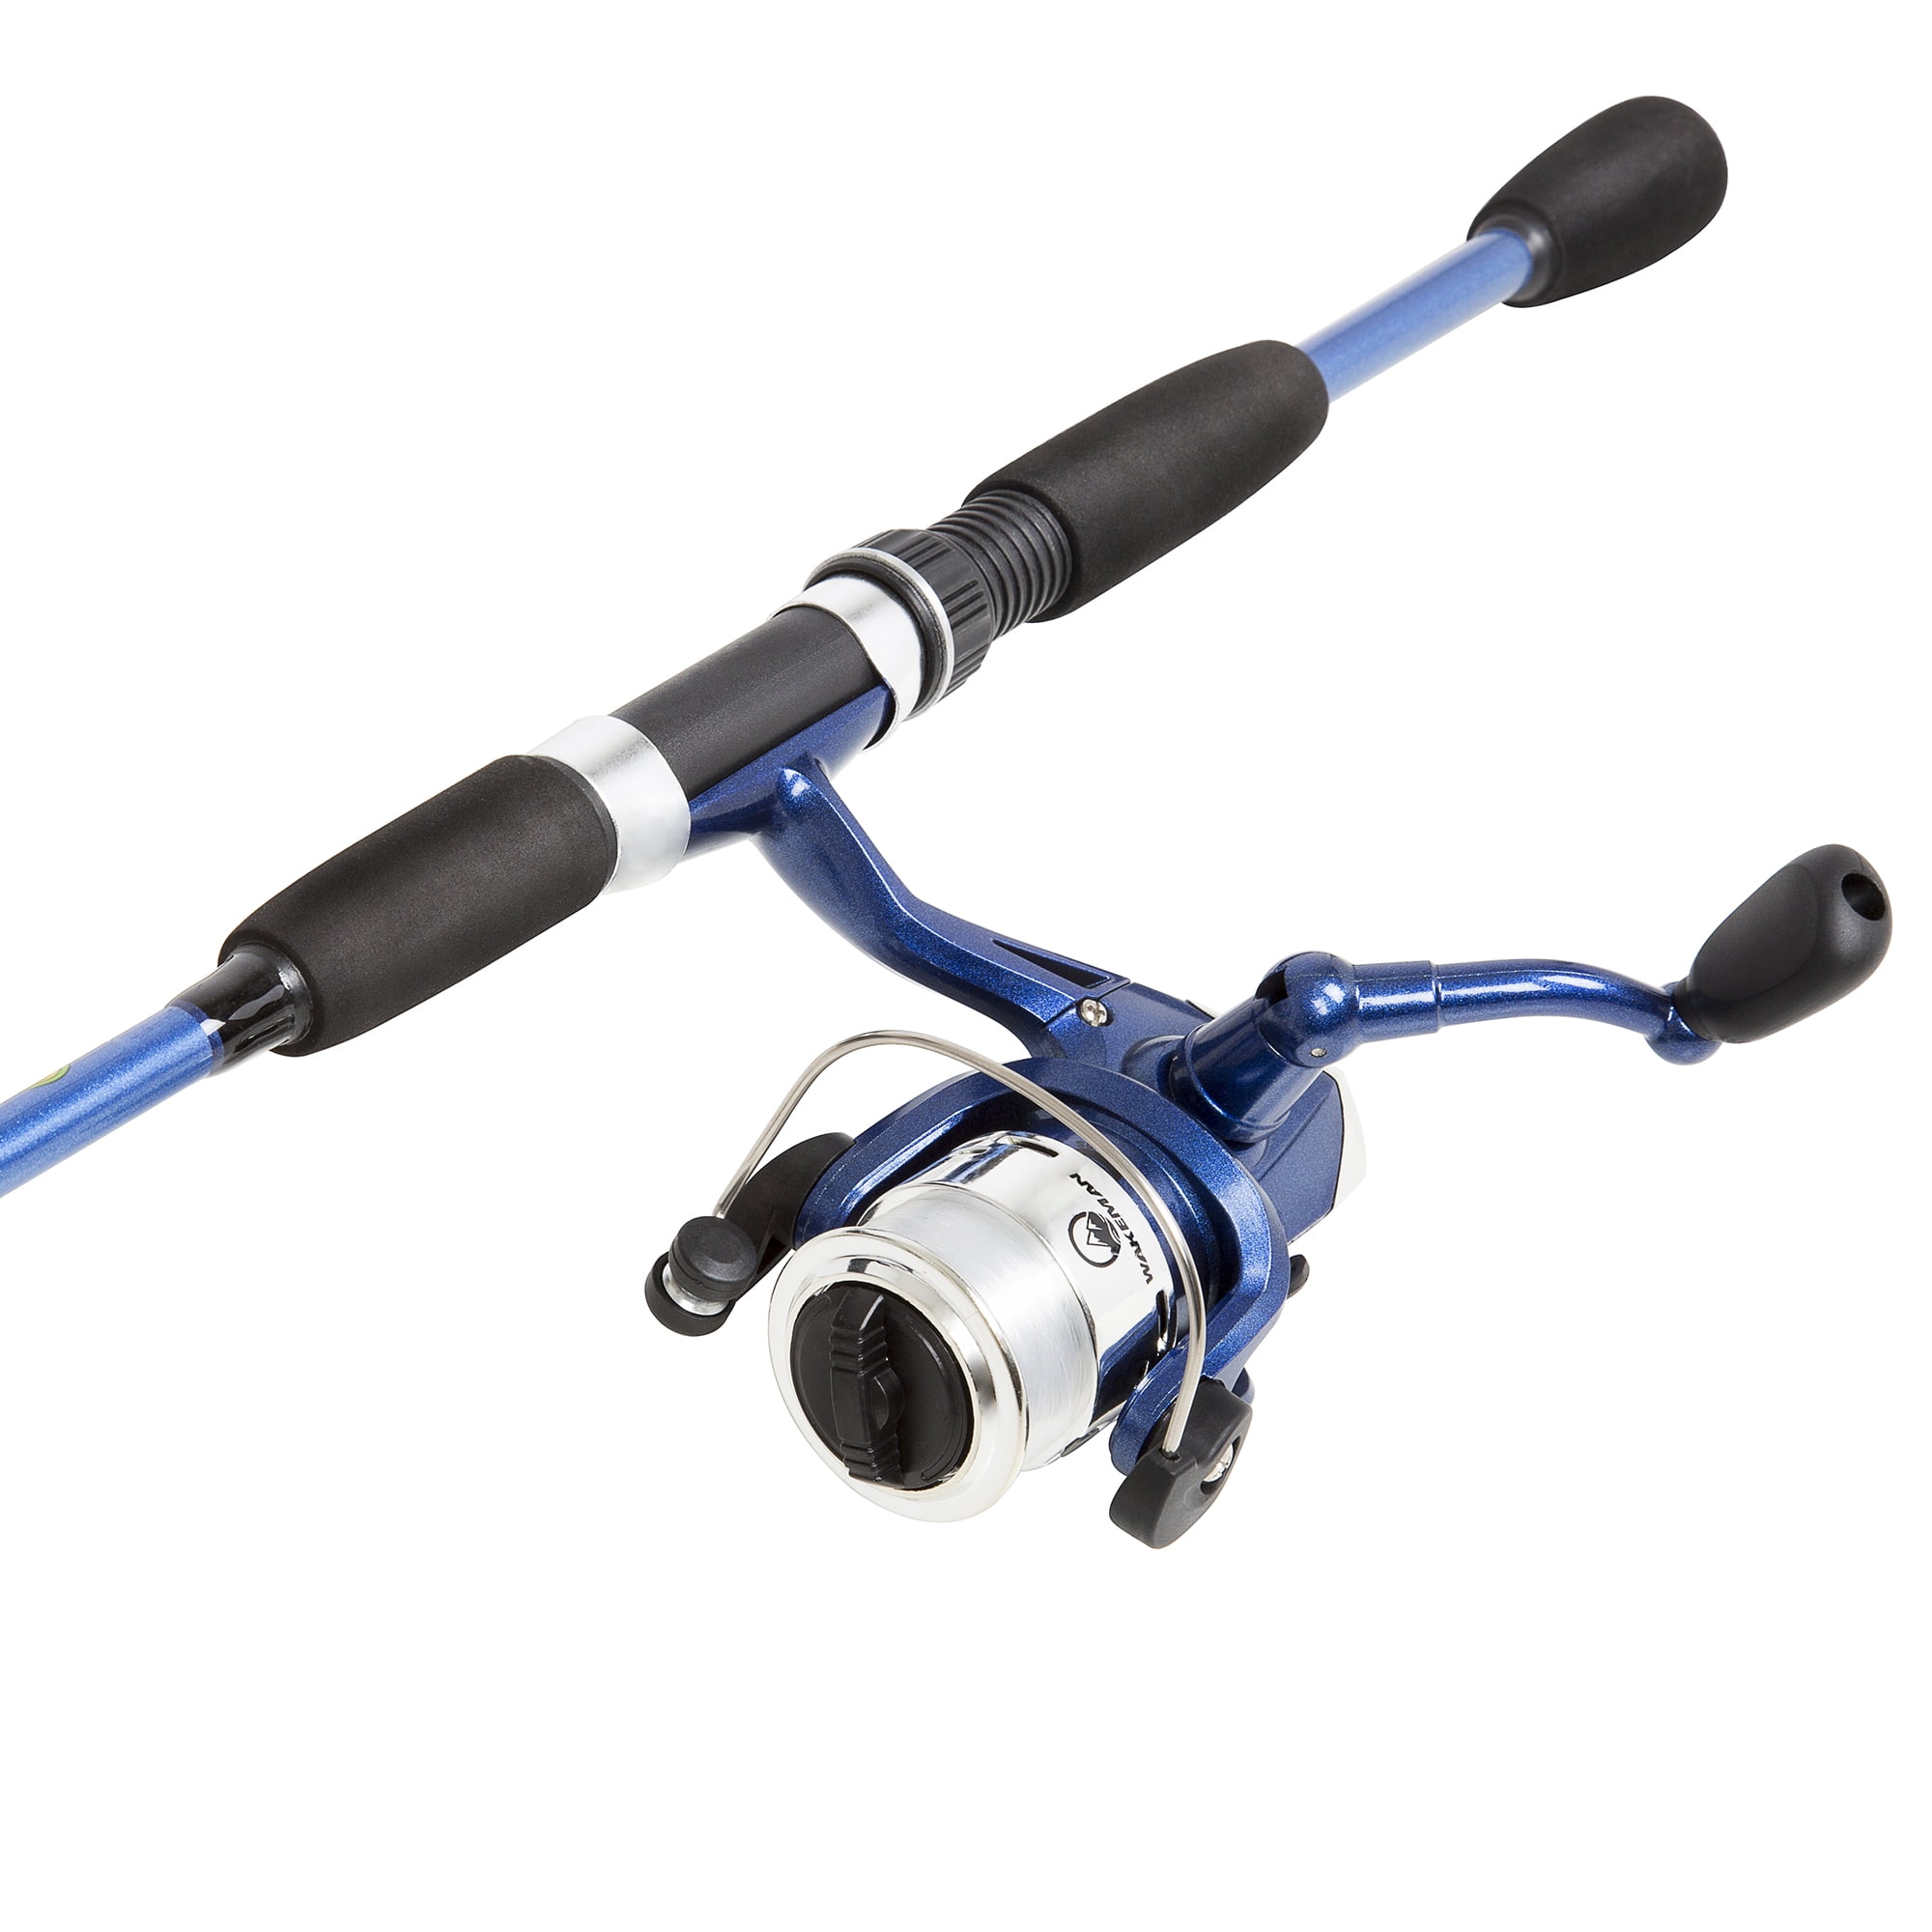  Fiberglass Fishing Pole - Strike Series Collapsible Rod and  Spinning Reel Combo Gear for Catching Walleye, Bass, Trout, and More by  Wakeman (Black) : Sports & Outdoors